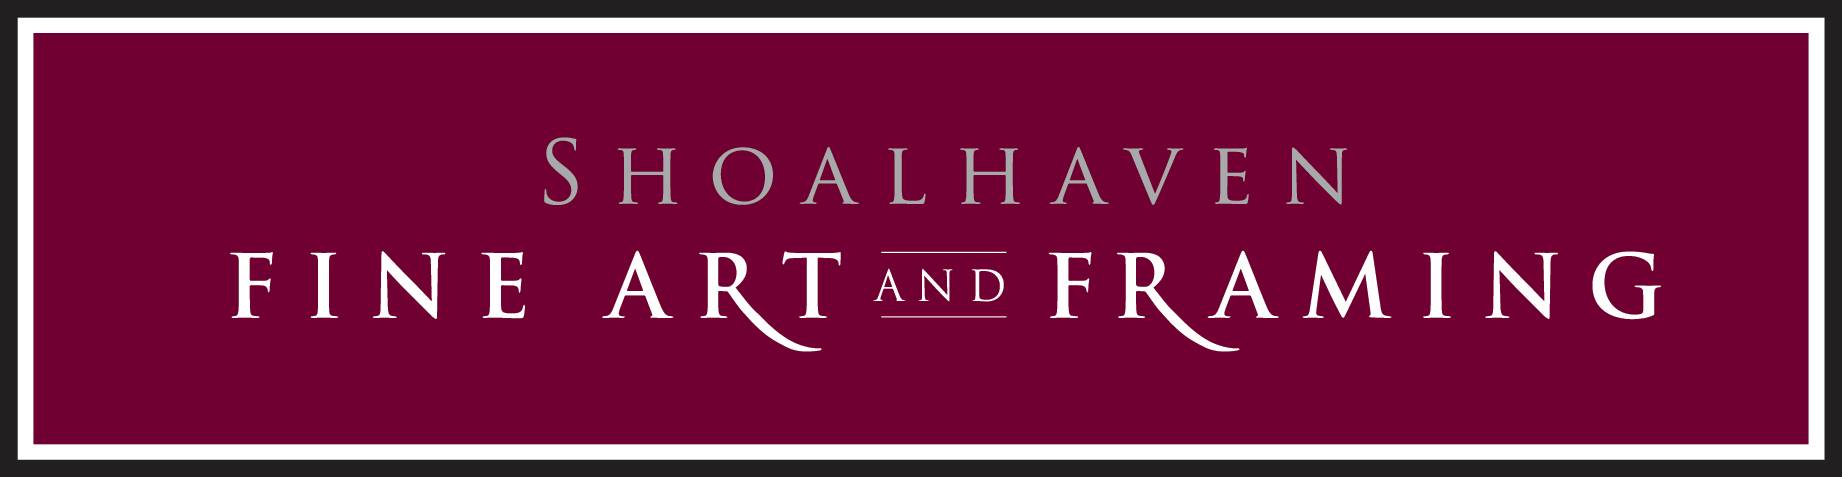 Shoalhaven Fine Art and Framing are Framing Specialists